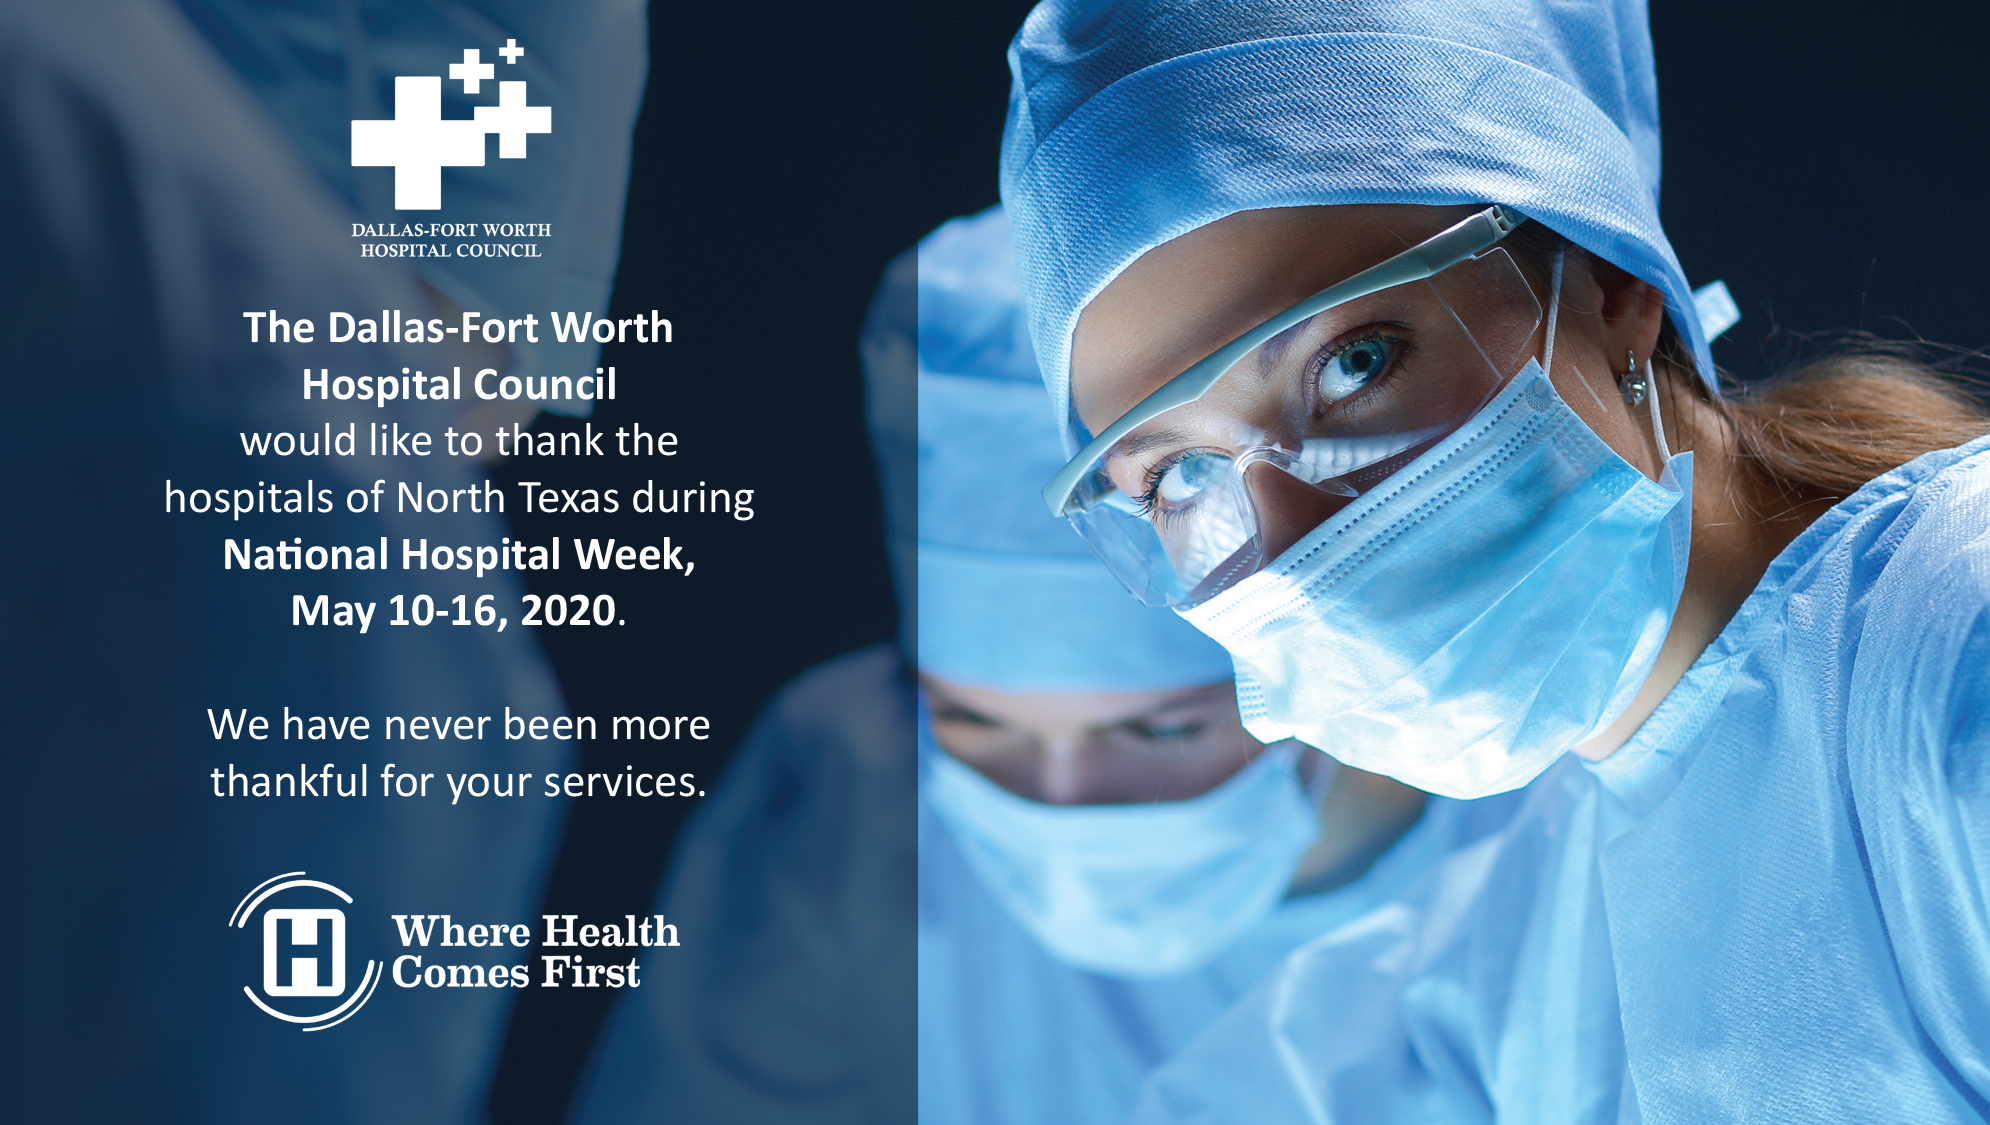 We would like to thank our hospitals during National Hospital Week 2020